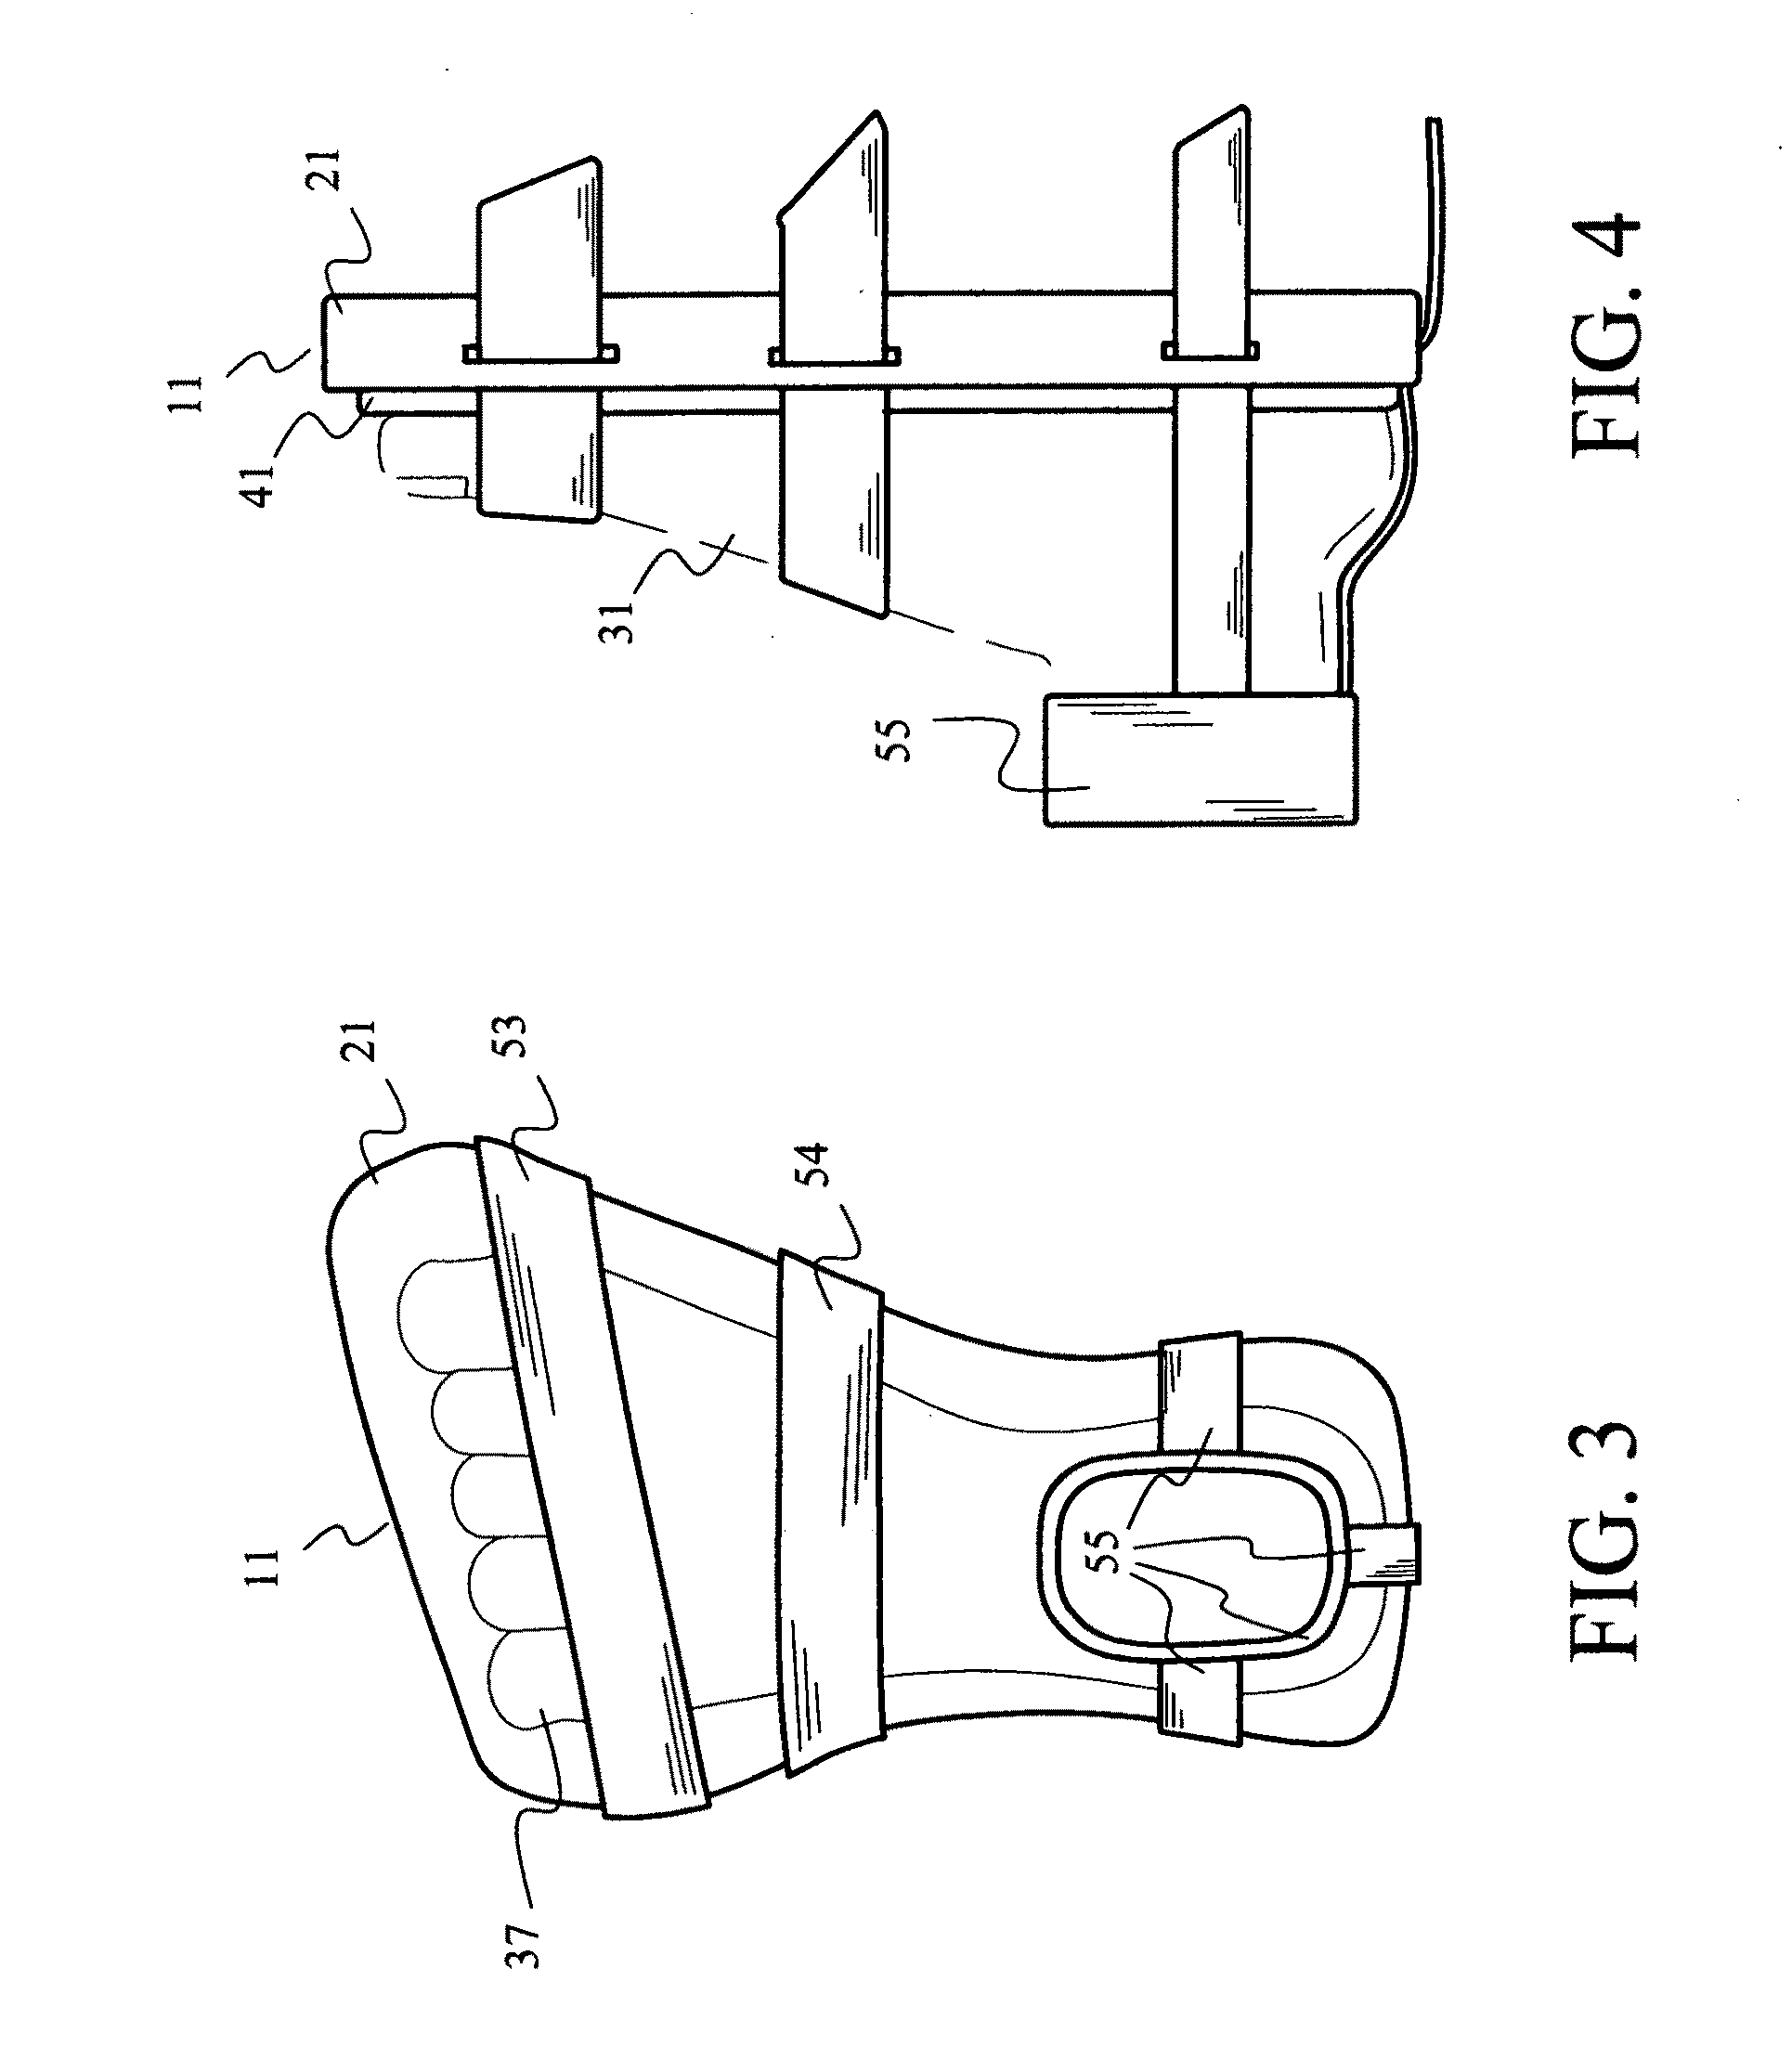 Therapeutic device that provides stimulation to an immobilized extremity